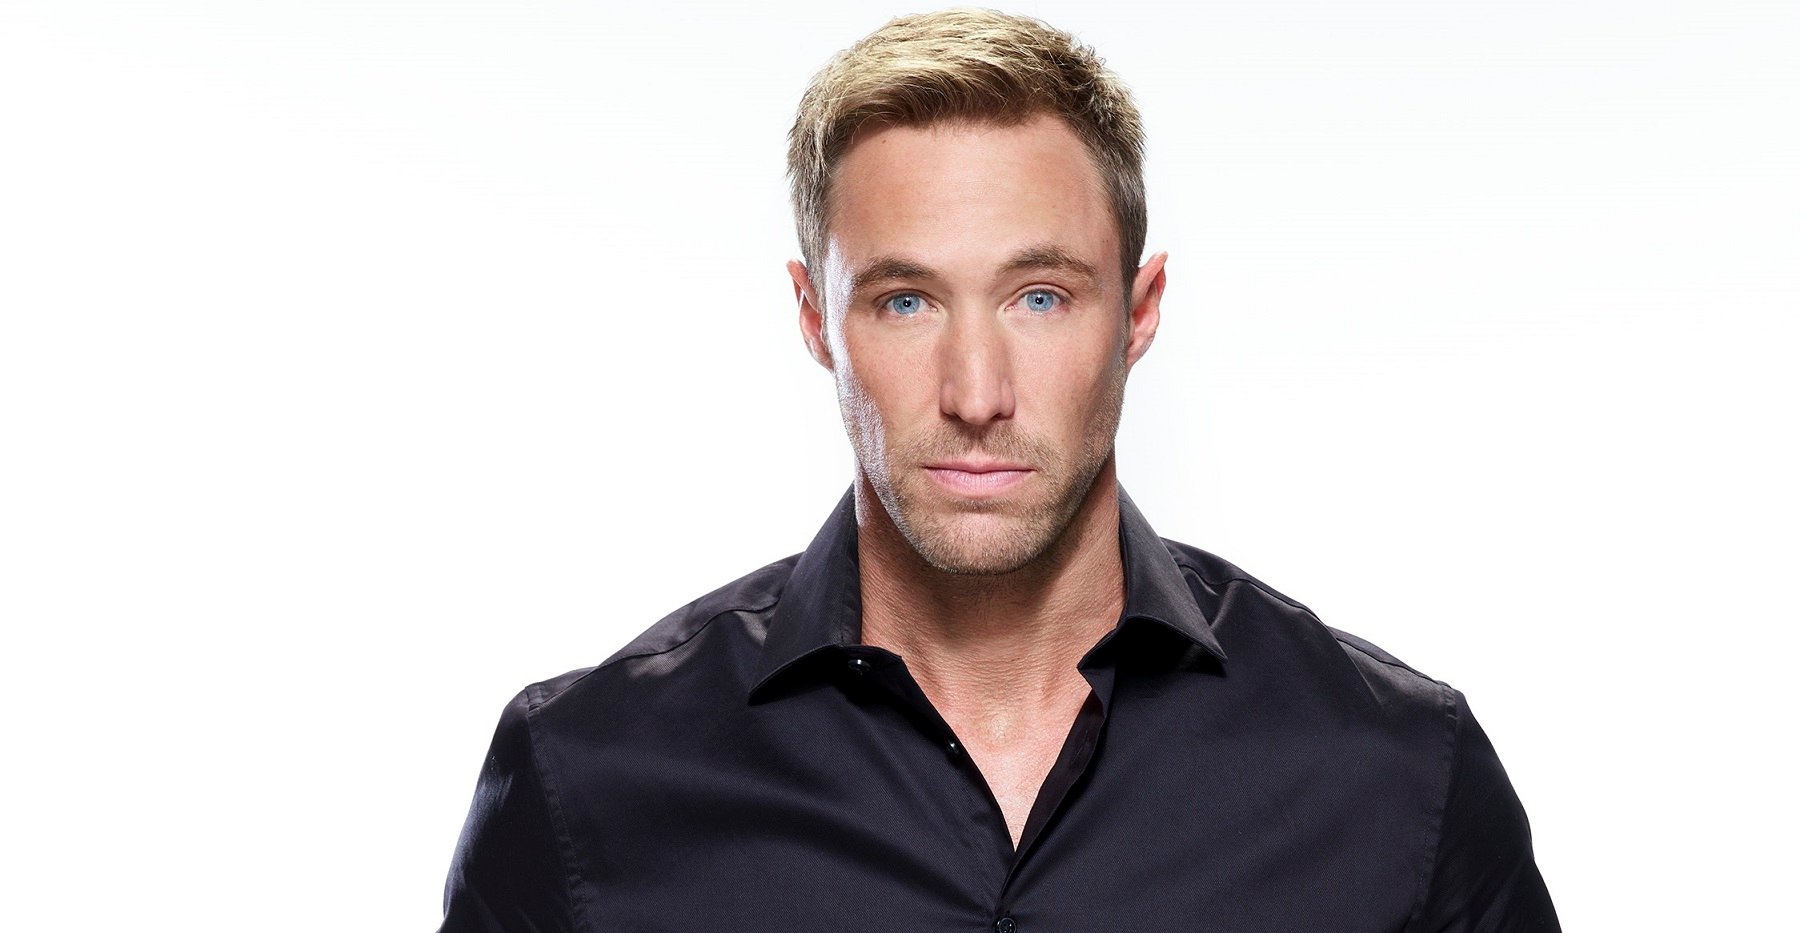 Days of Our Lives comings and goings focus on Kyle Lowder as Rex Brady, pictured here in a black collared shirt